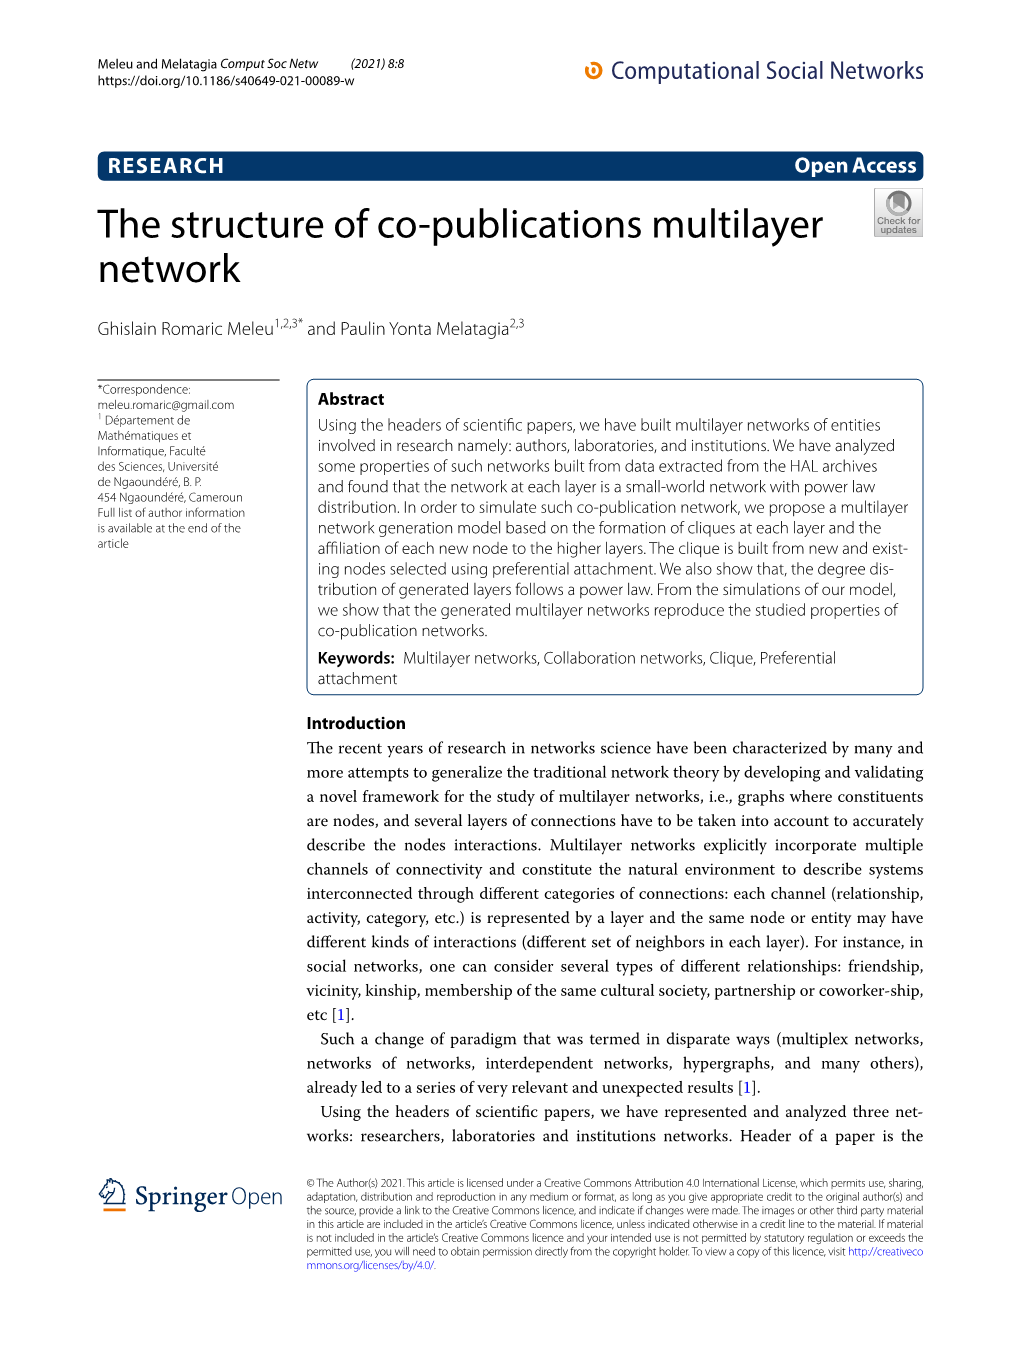 The Structure of Co-Publications Multilayer Network